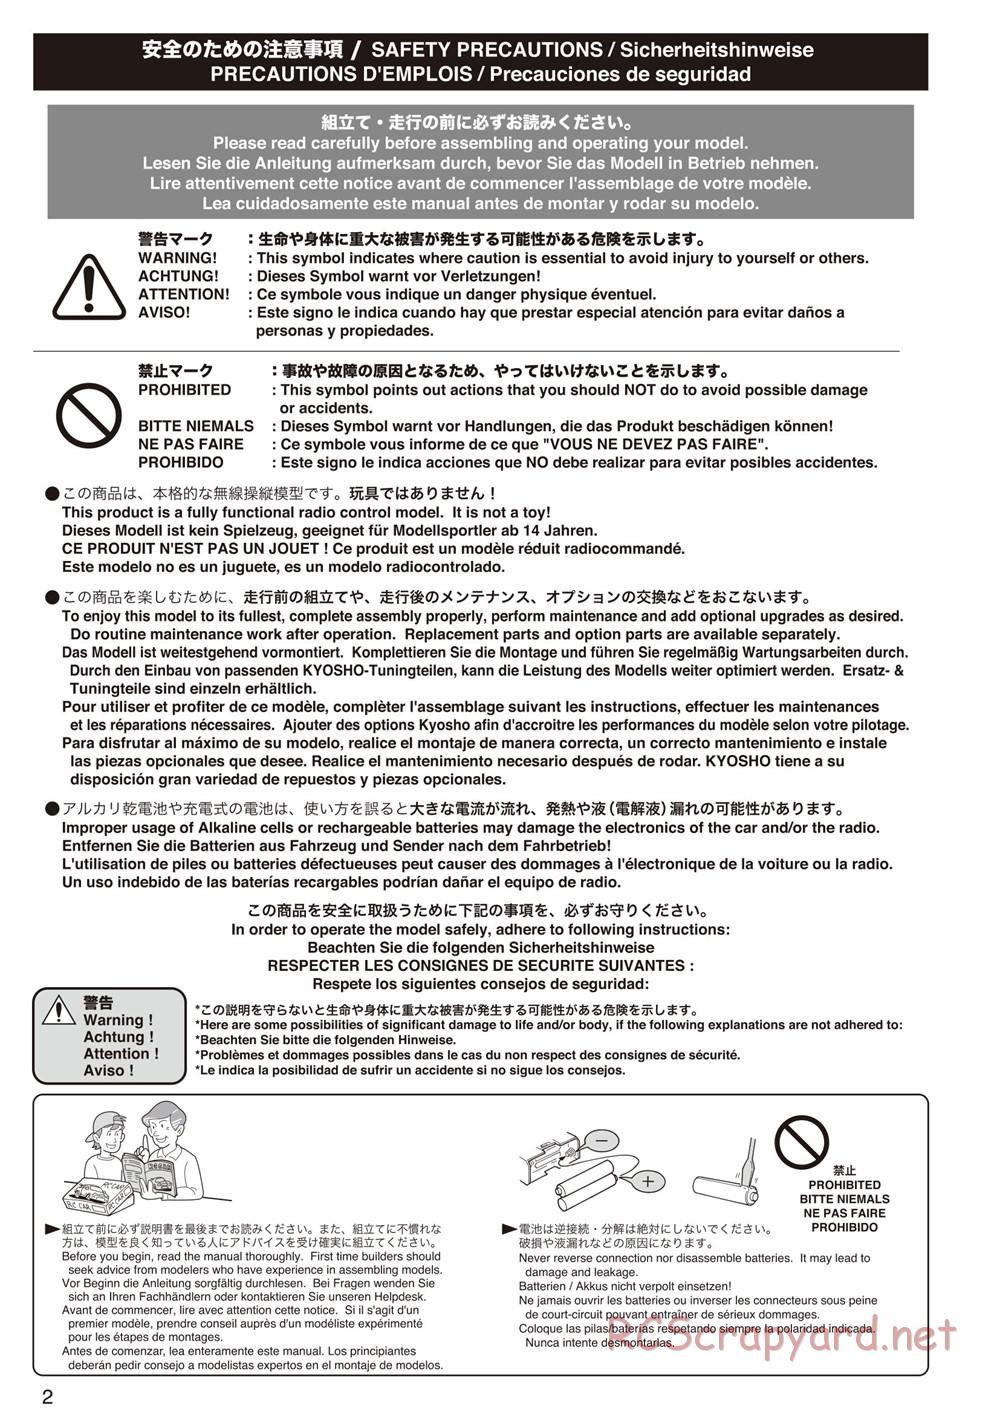 Kyosho - Mad Force Kruiser 2.0 - Manual - Page 2